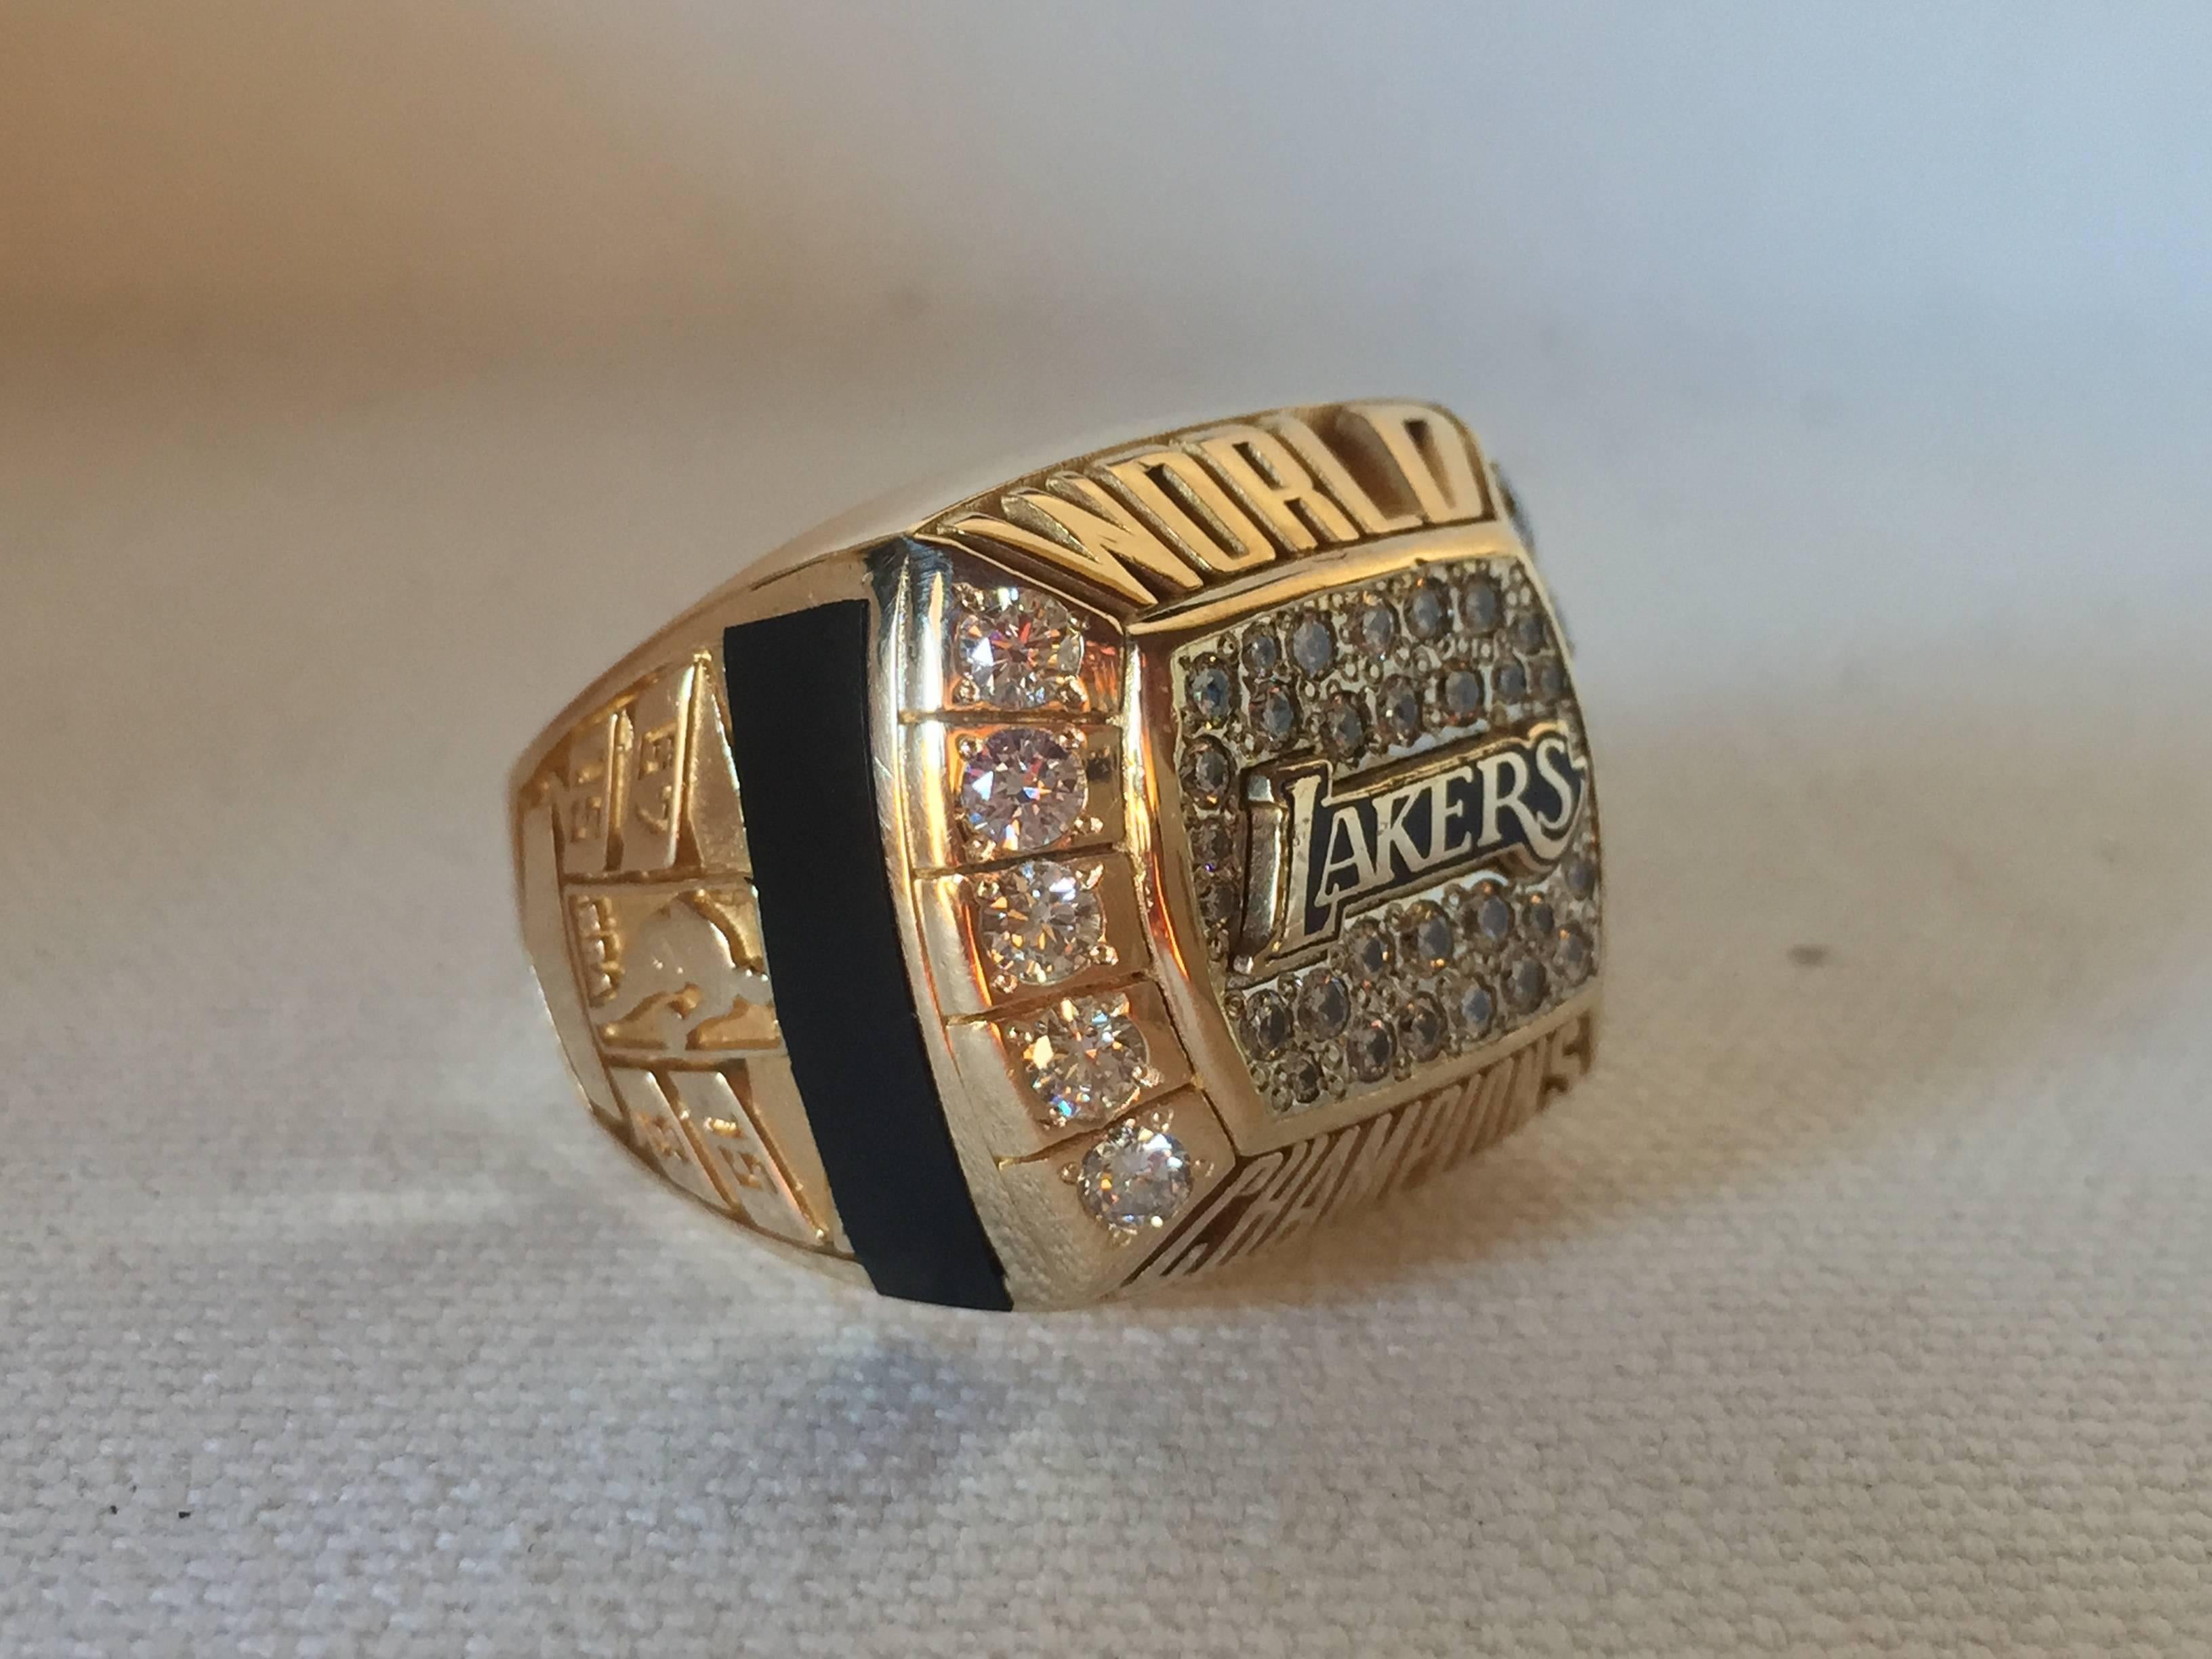 2000 Los Angeles Lakers NBA Championship Ring with Original Presentation Box For Sale 4